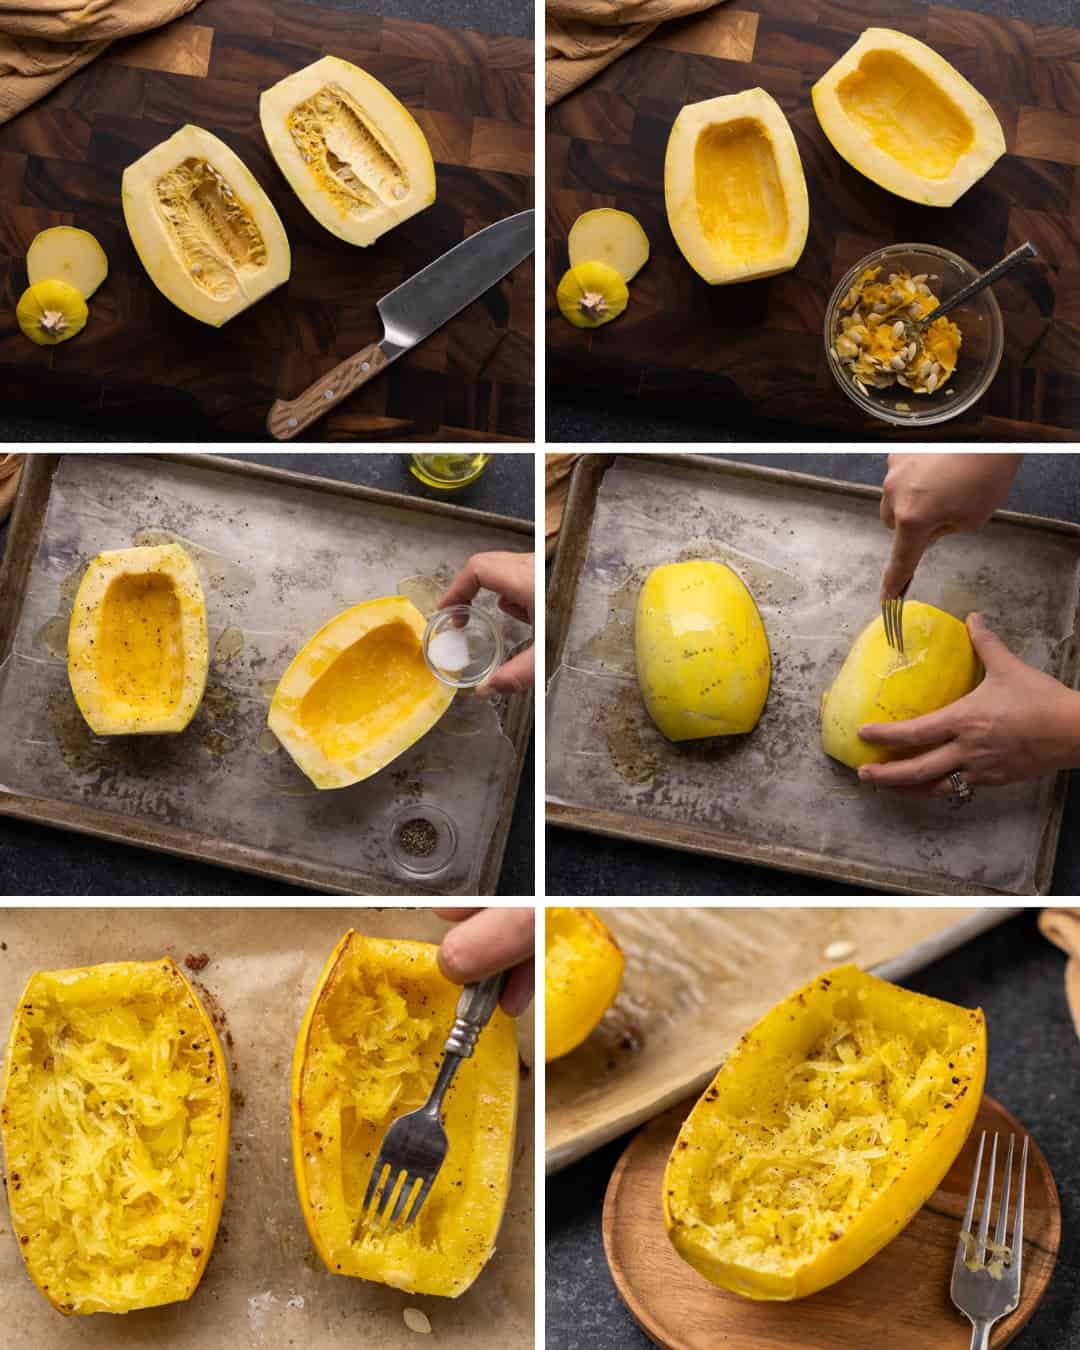 Process shots image collage to show how to make spaghetti squash from start to finish.